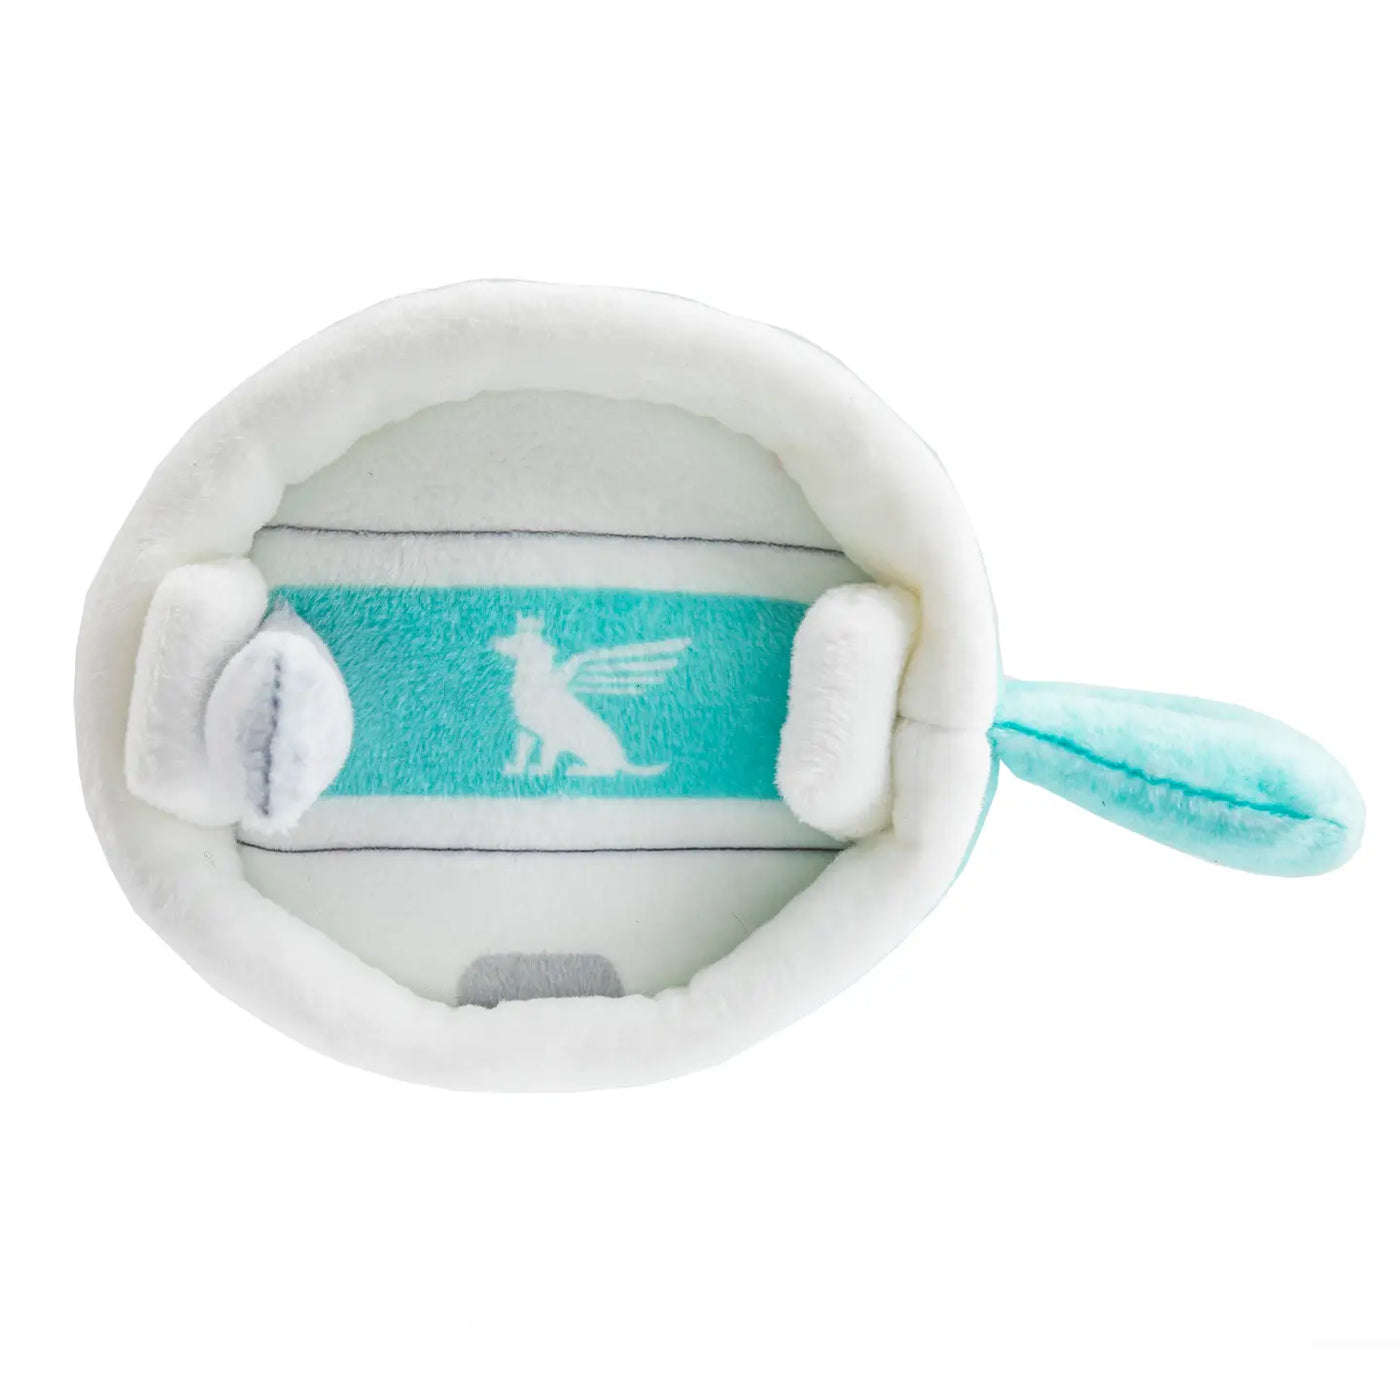 Snuggly Cup - Teal Squeaker Dog Toy